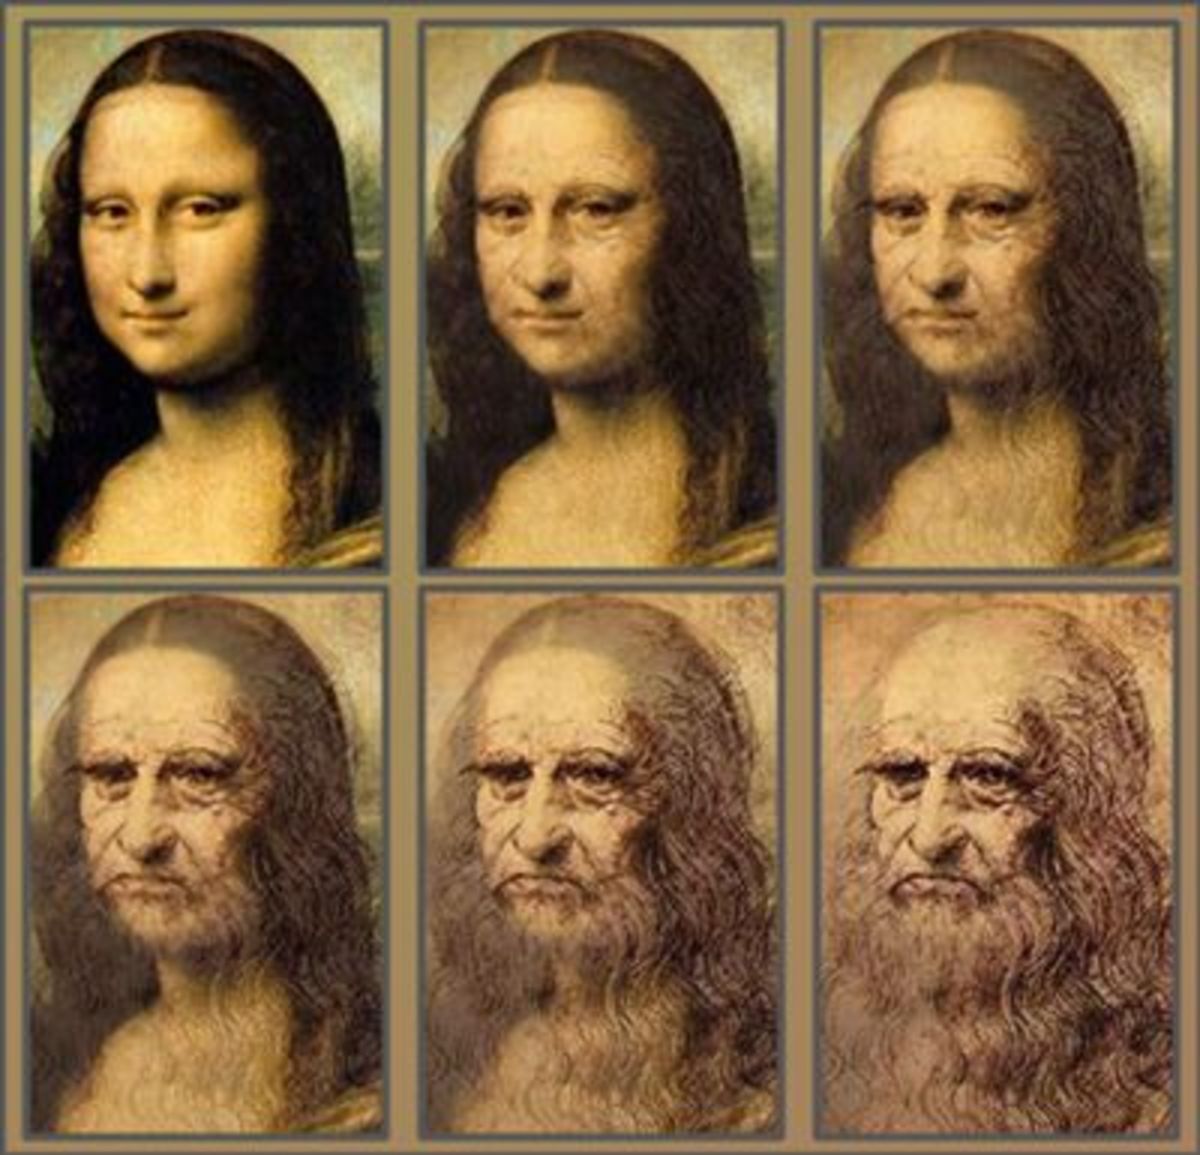 Some see a striking resemblance between the artist and his sitter. Some even believe it could be a self-portrait of Da Vinci as a woman